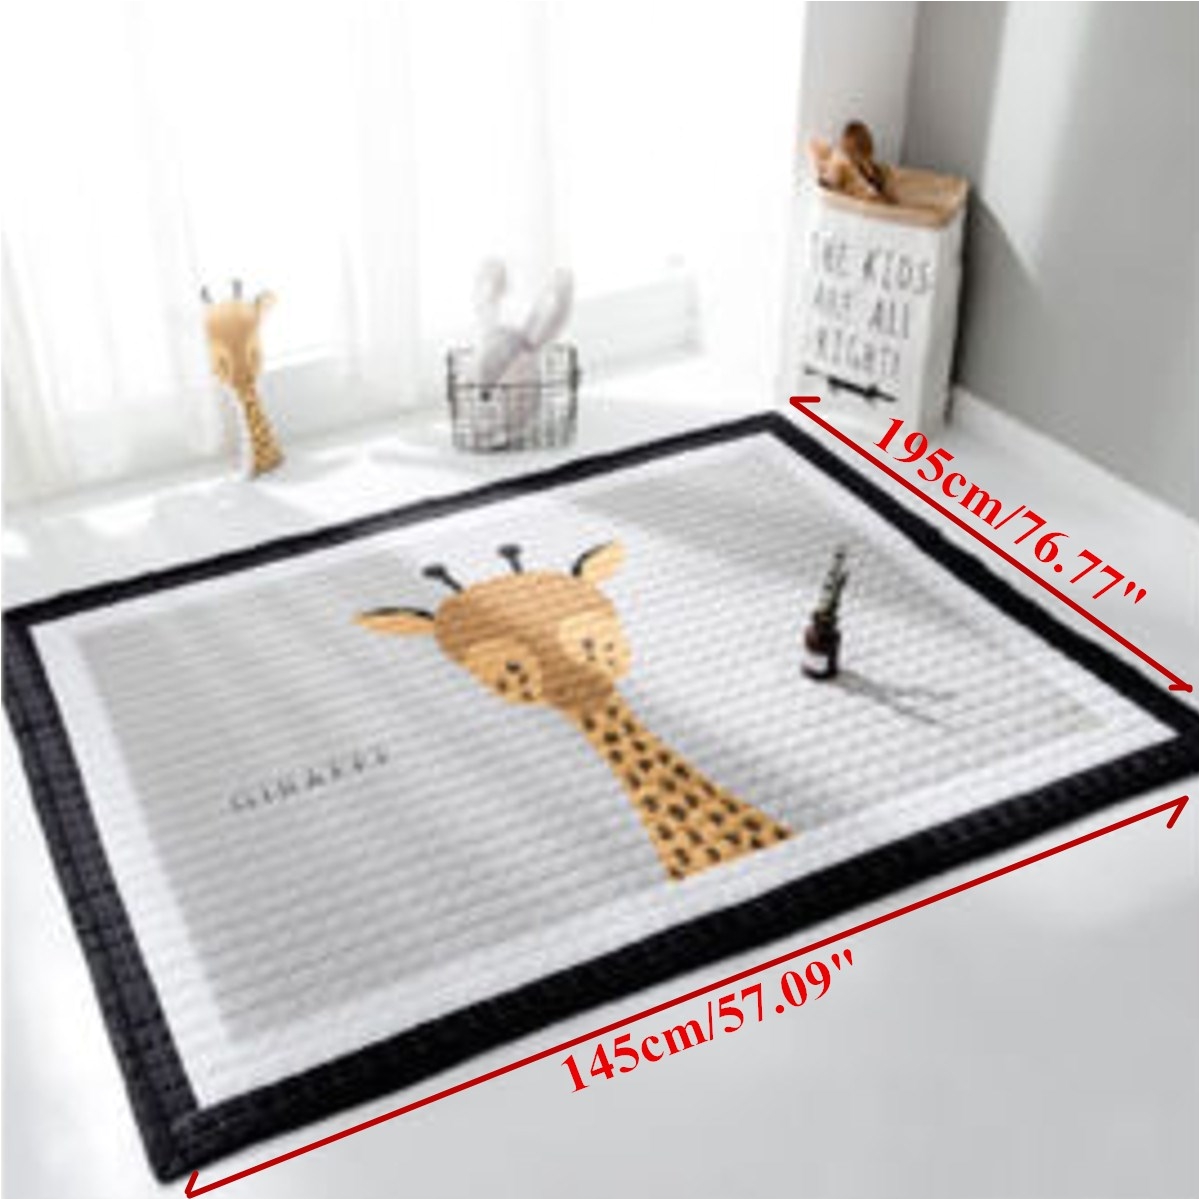 195x145cm baby kids play mat floor rug crawling blanket large soft rectangle cotton carpet modern style floor mats in carpet from home garden on